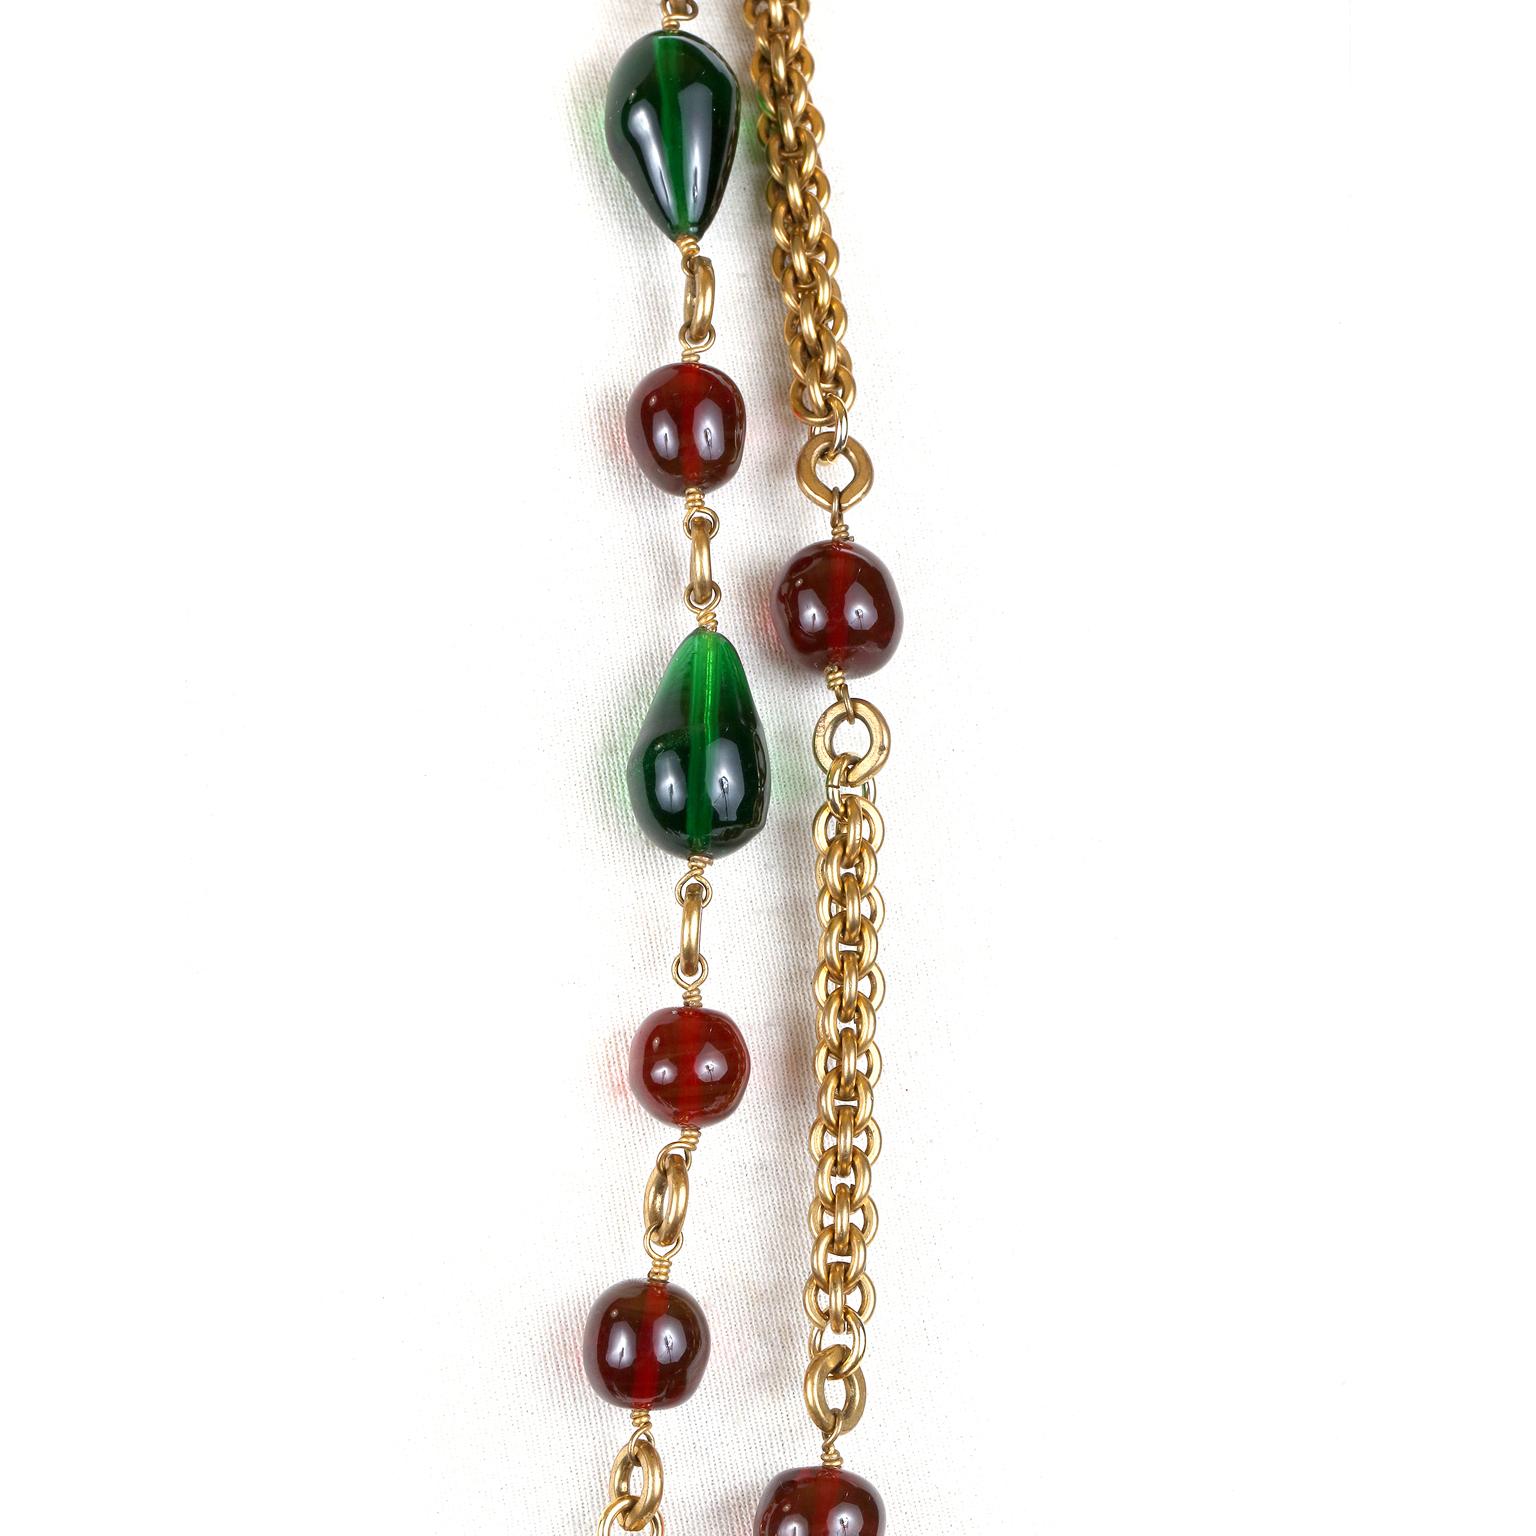 Women's or Men's Chanel Red and Green Gripoix Gold Twist Chain